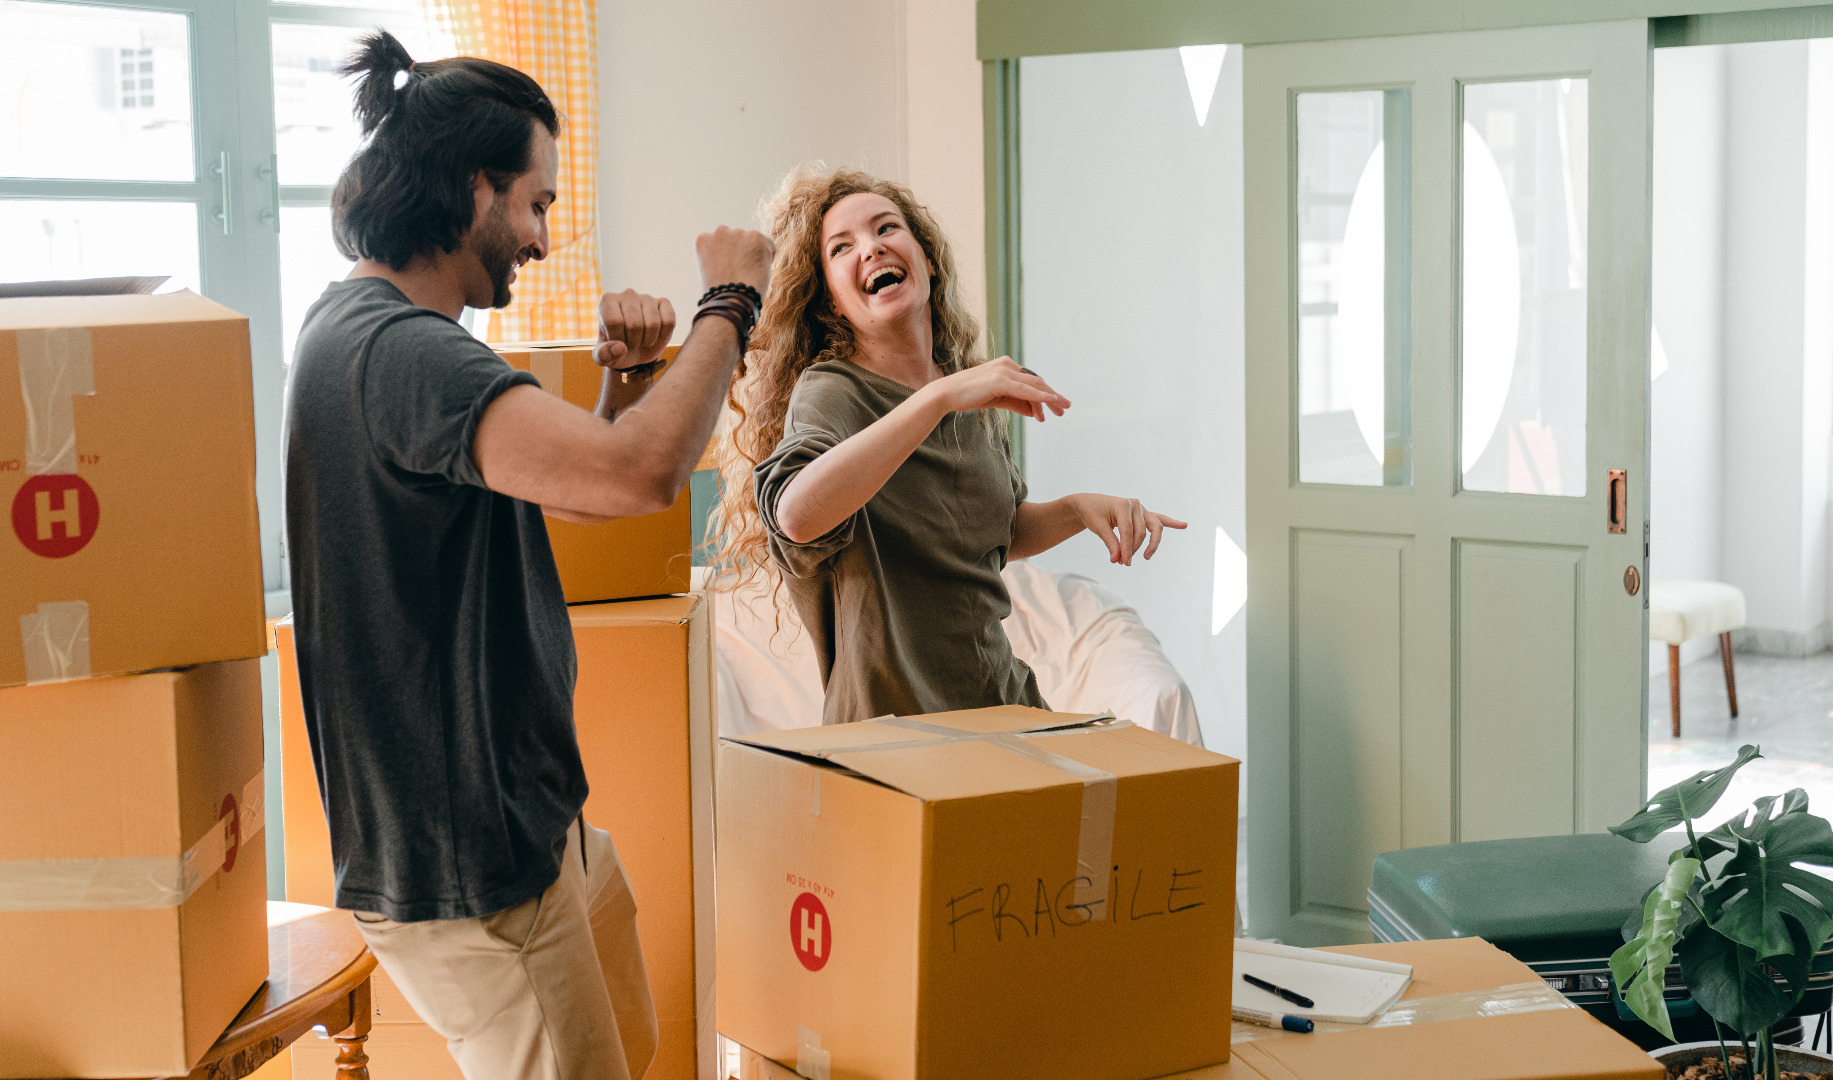 Couple laughing and dancing while unpacking